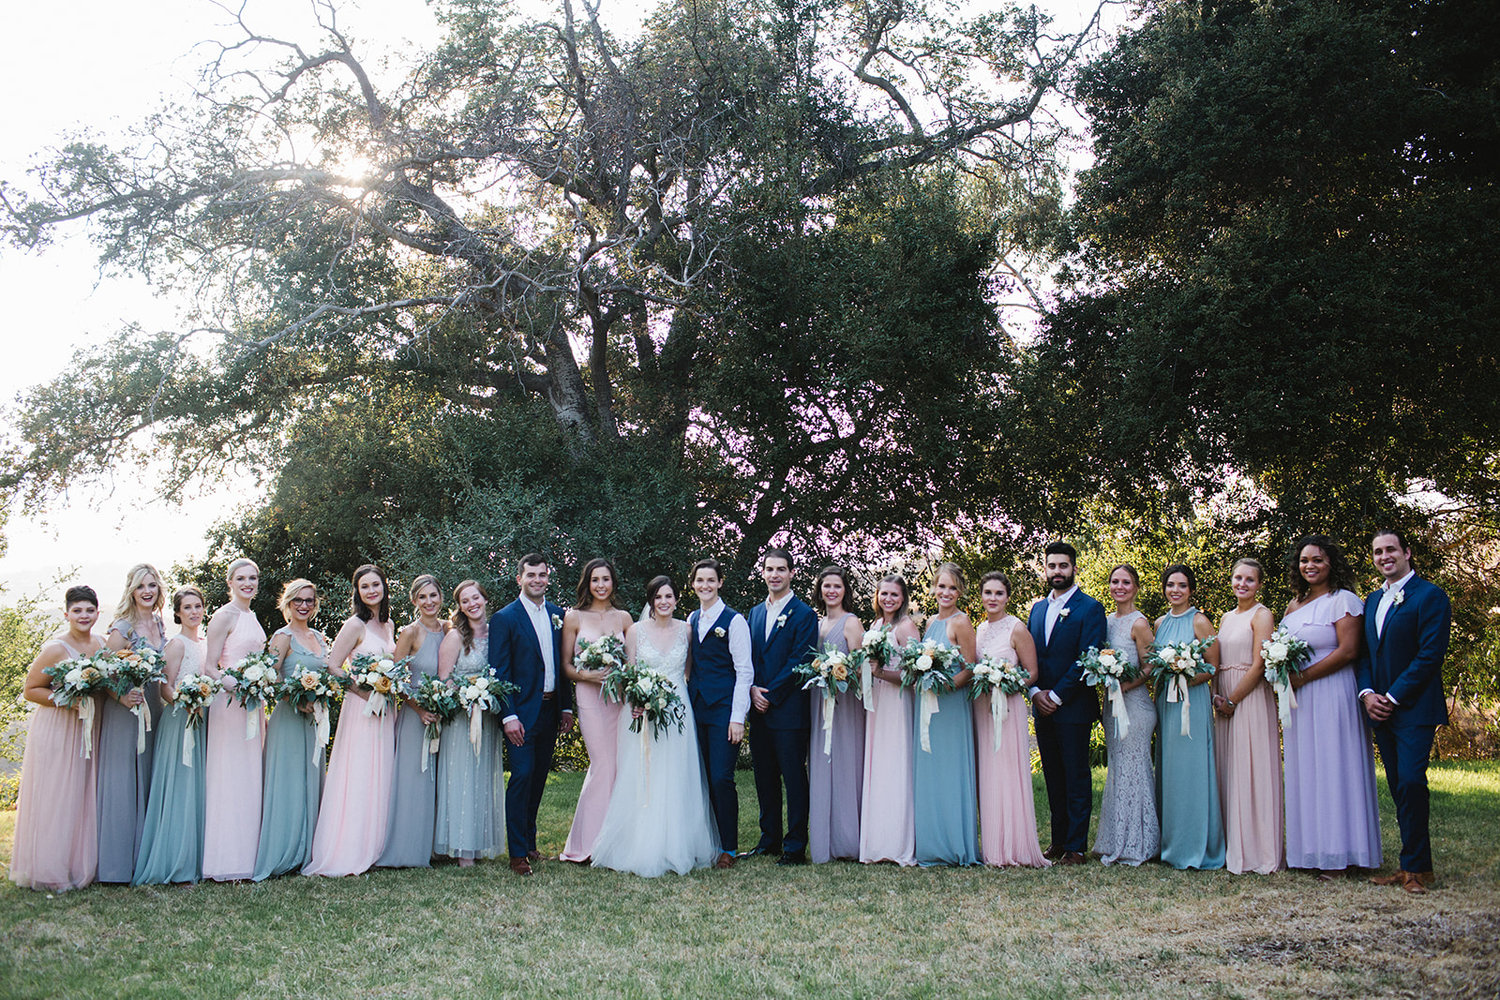 http://static1.squarespace.com/static/58fa6bb7be6594c3e63d4f2c/t/5bde469170a6addc771ee4bd/1541293725763/Large_Bridal_Party_Attire?format=1500w